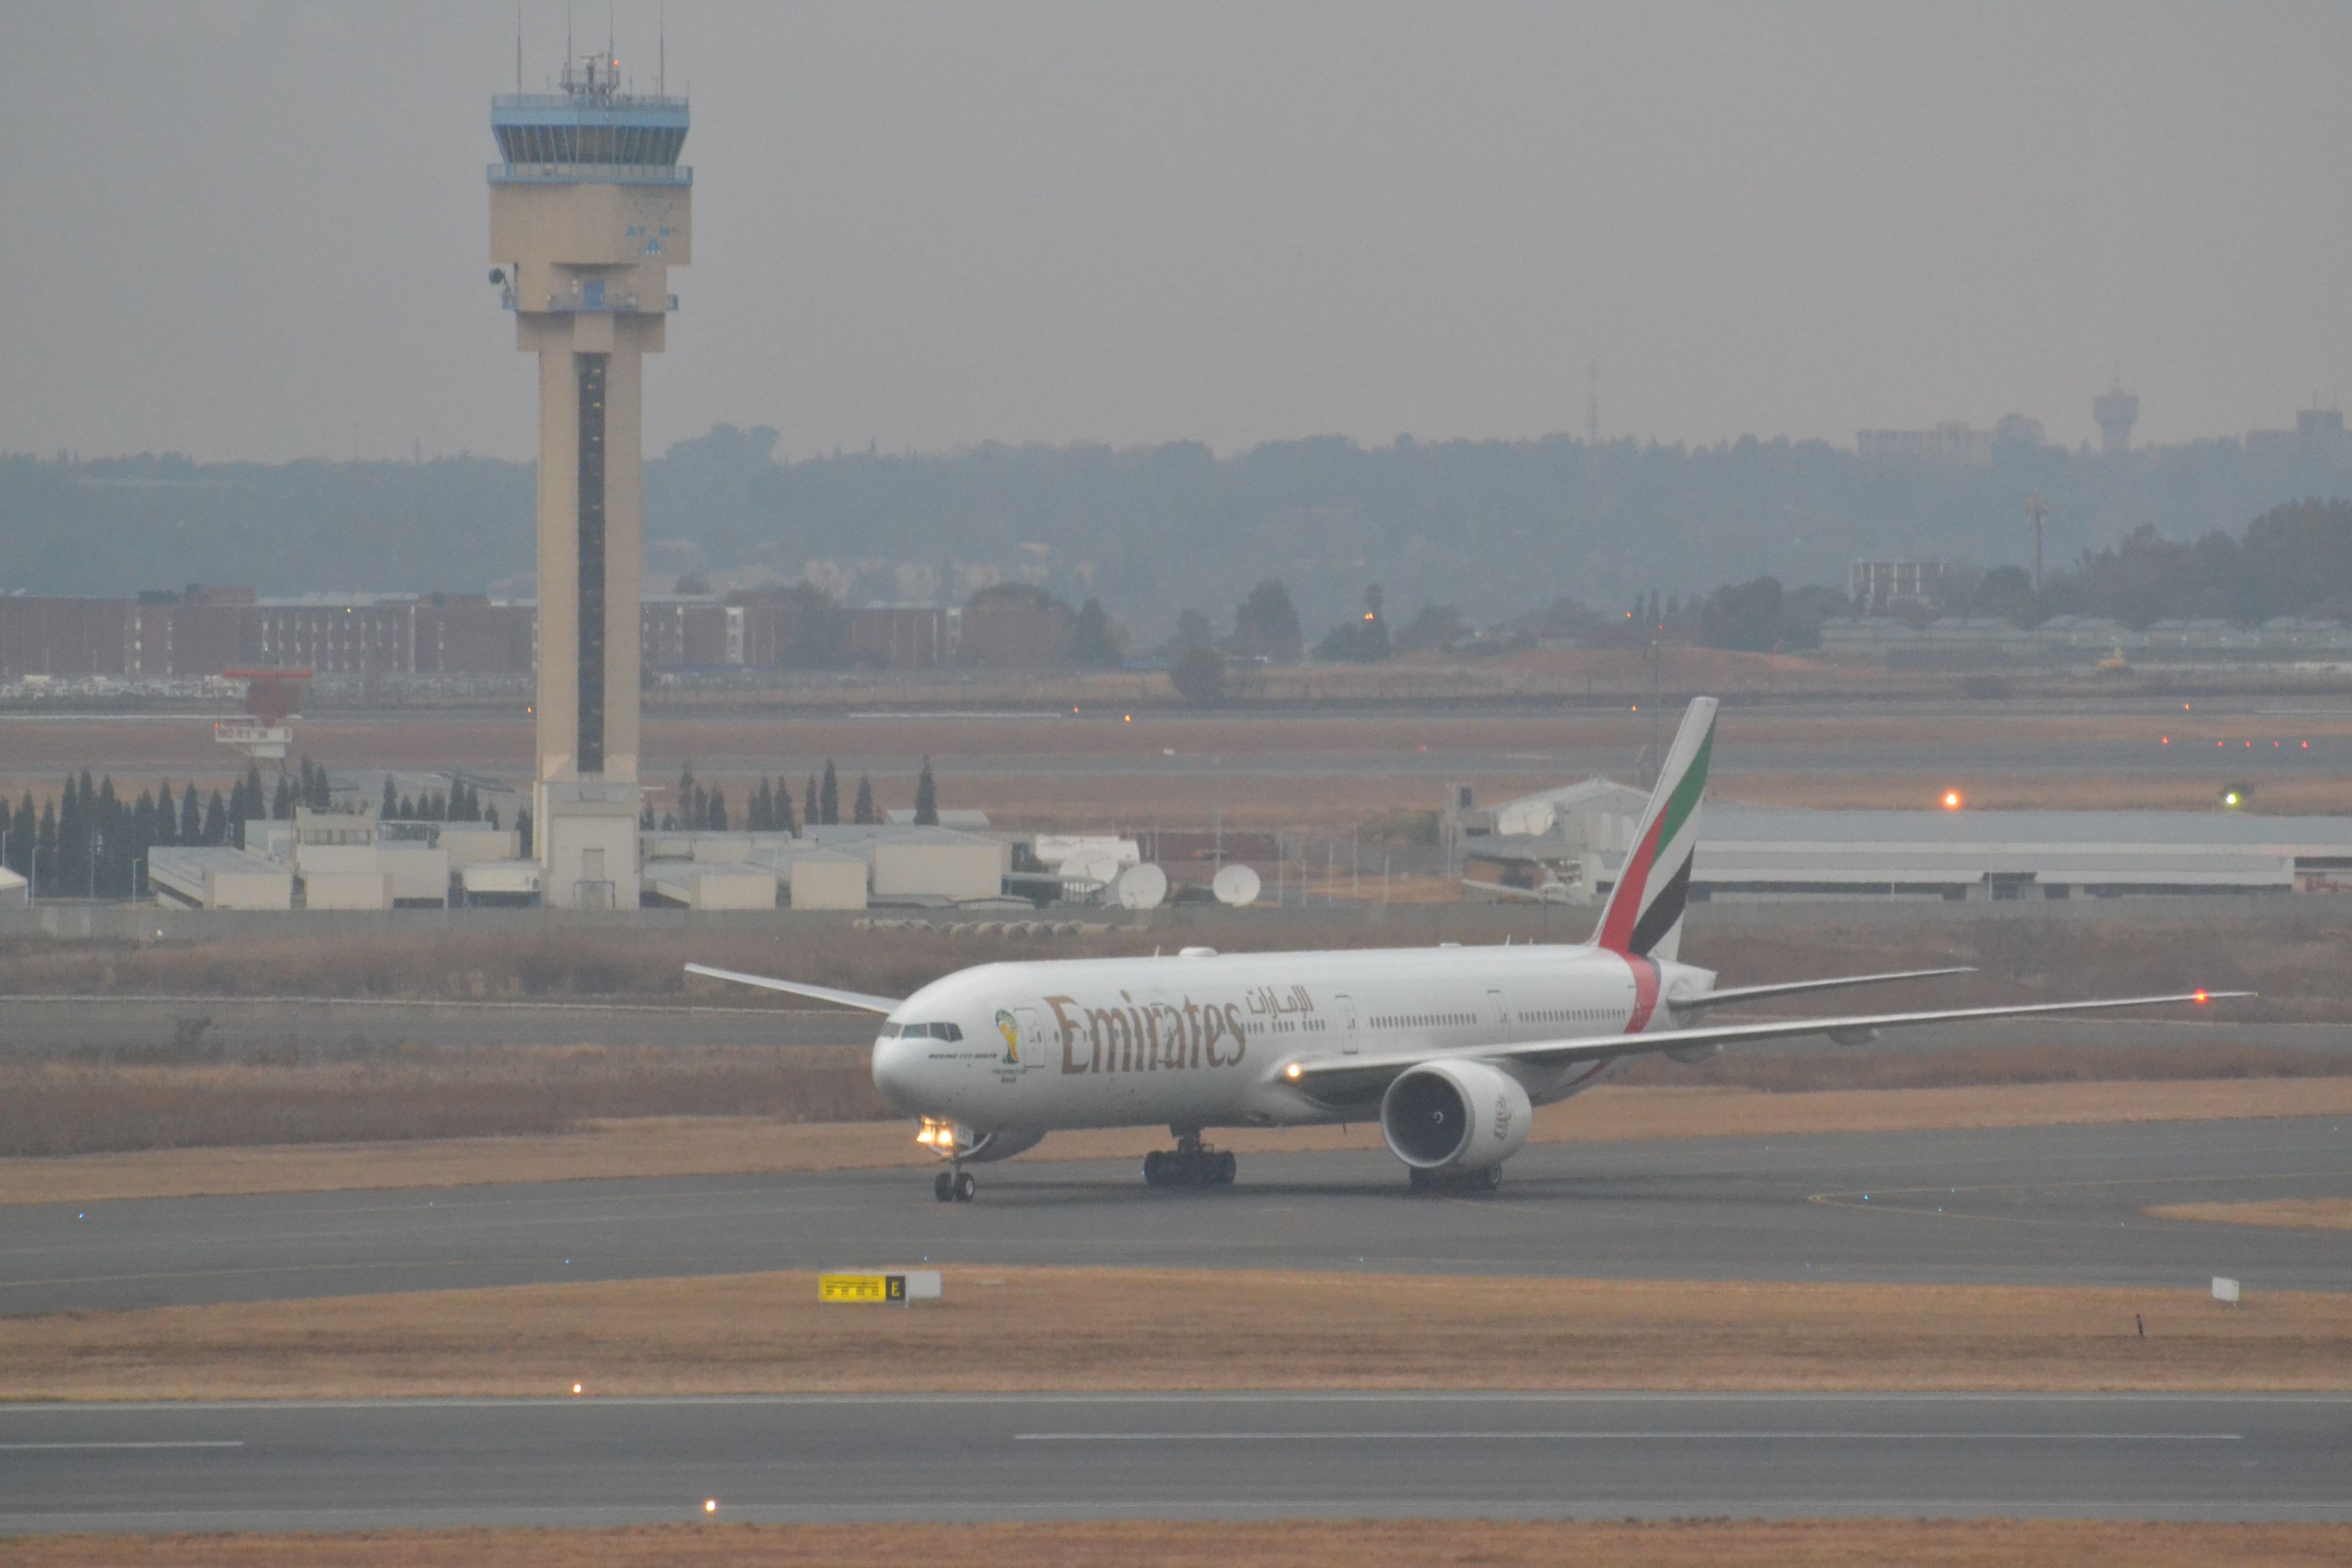 B777_de_Emirates_OR_Tambo_International_Airport_in_Johannesburg_South_Africa